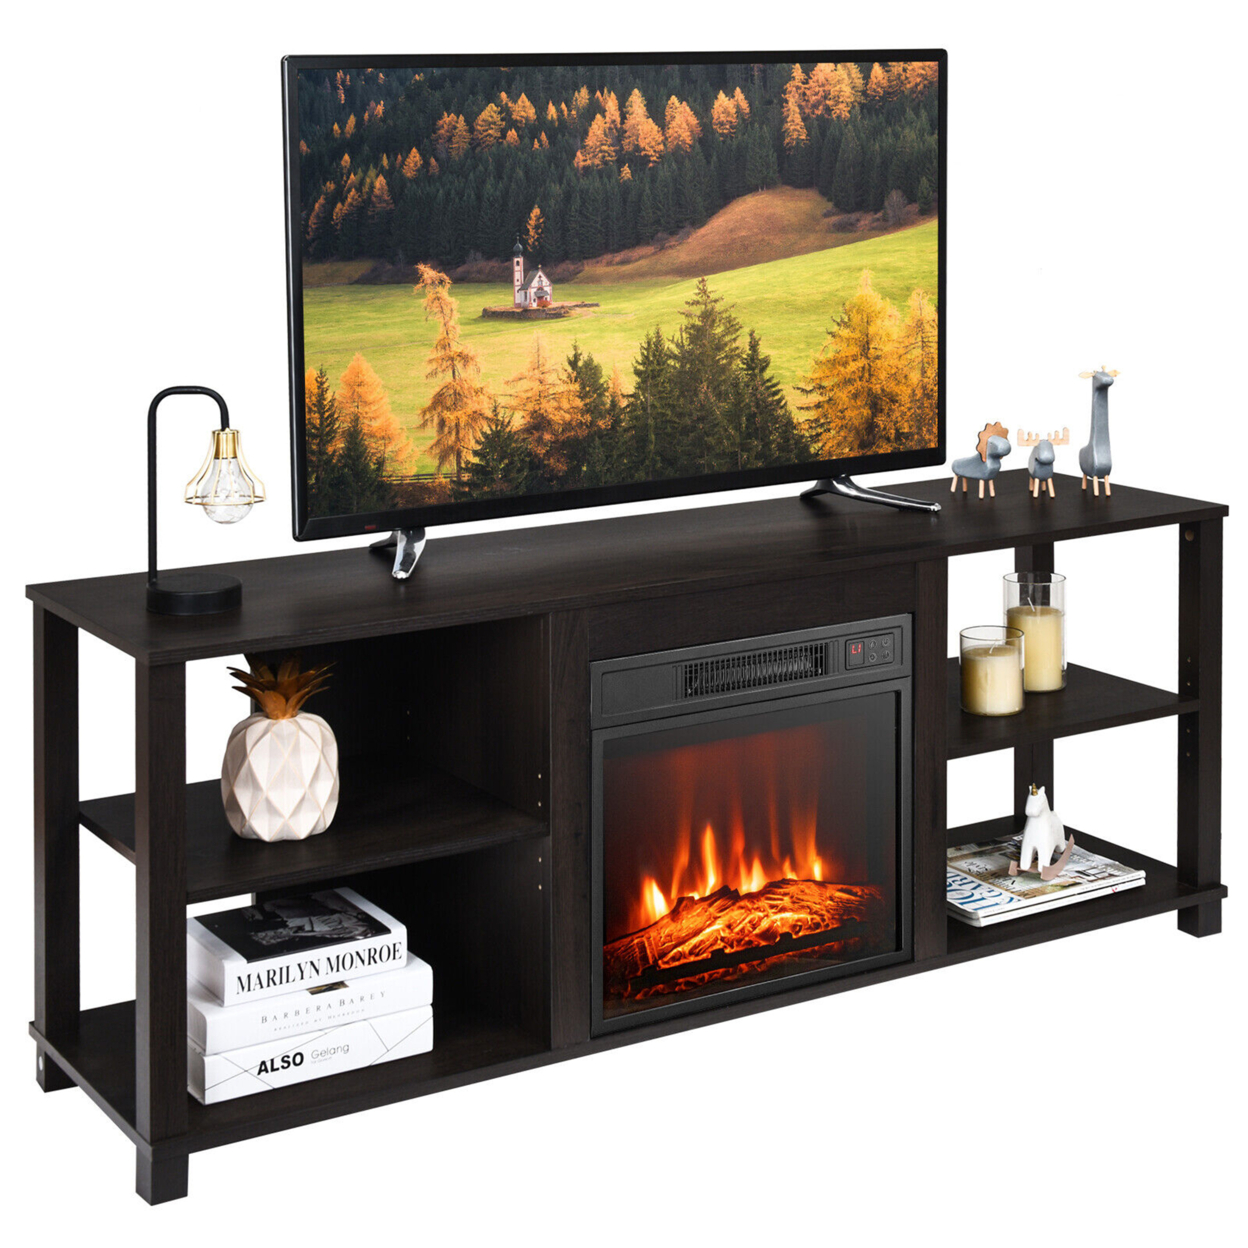 2-Tier TV Stand &Electric Fireplace Heater Storage Cabinet Console For 65 TV